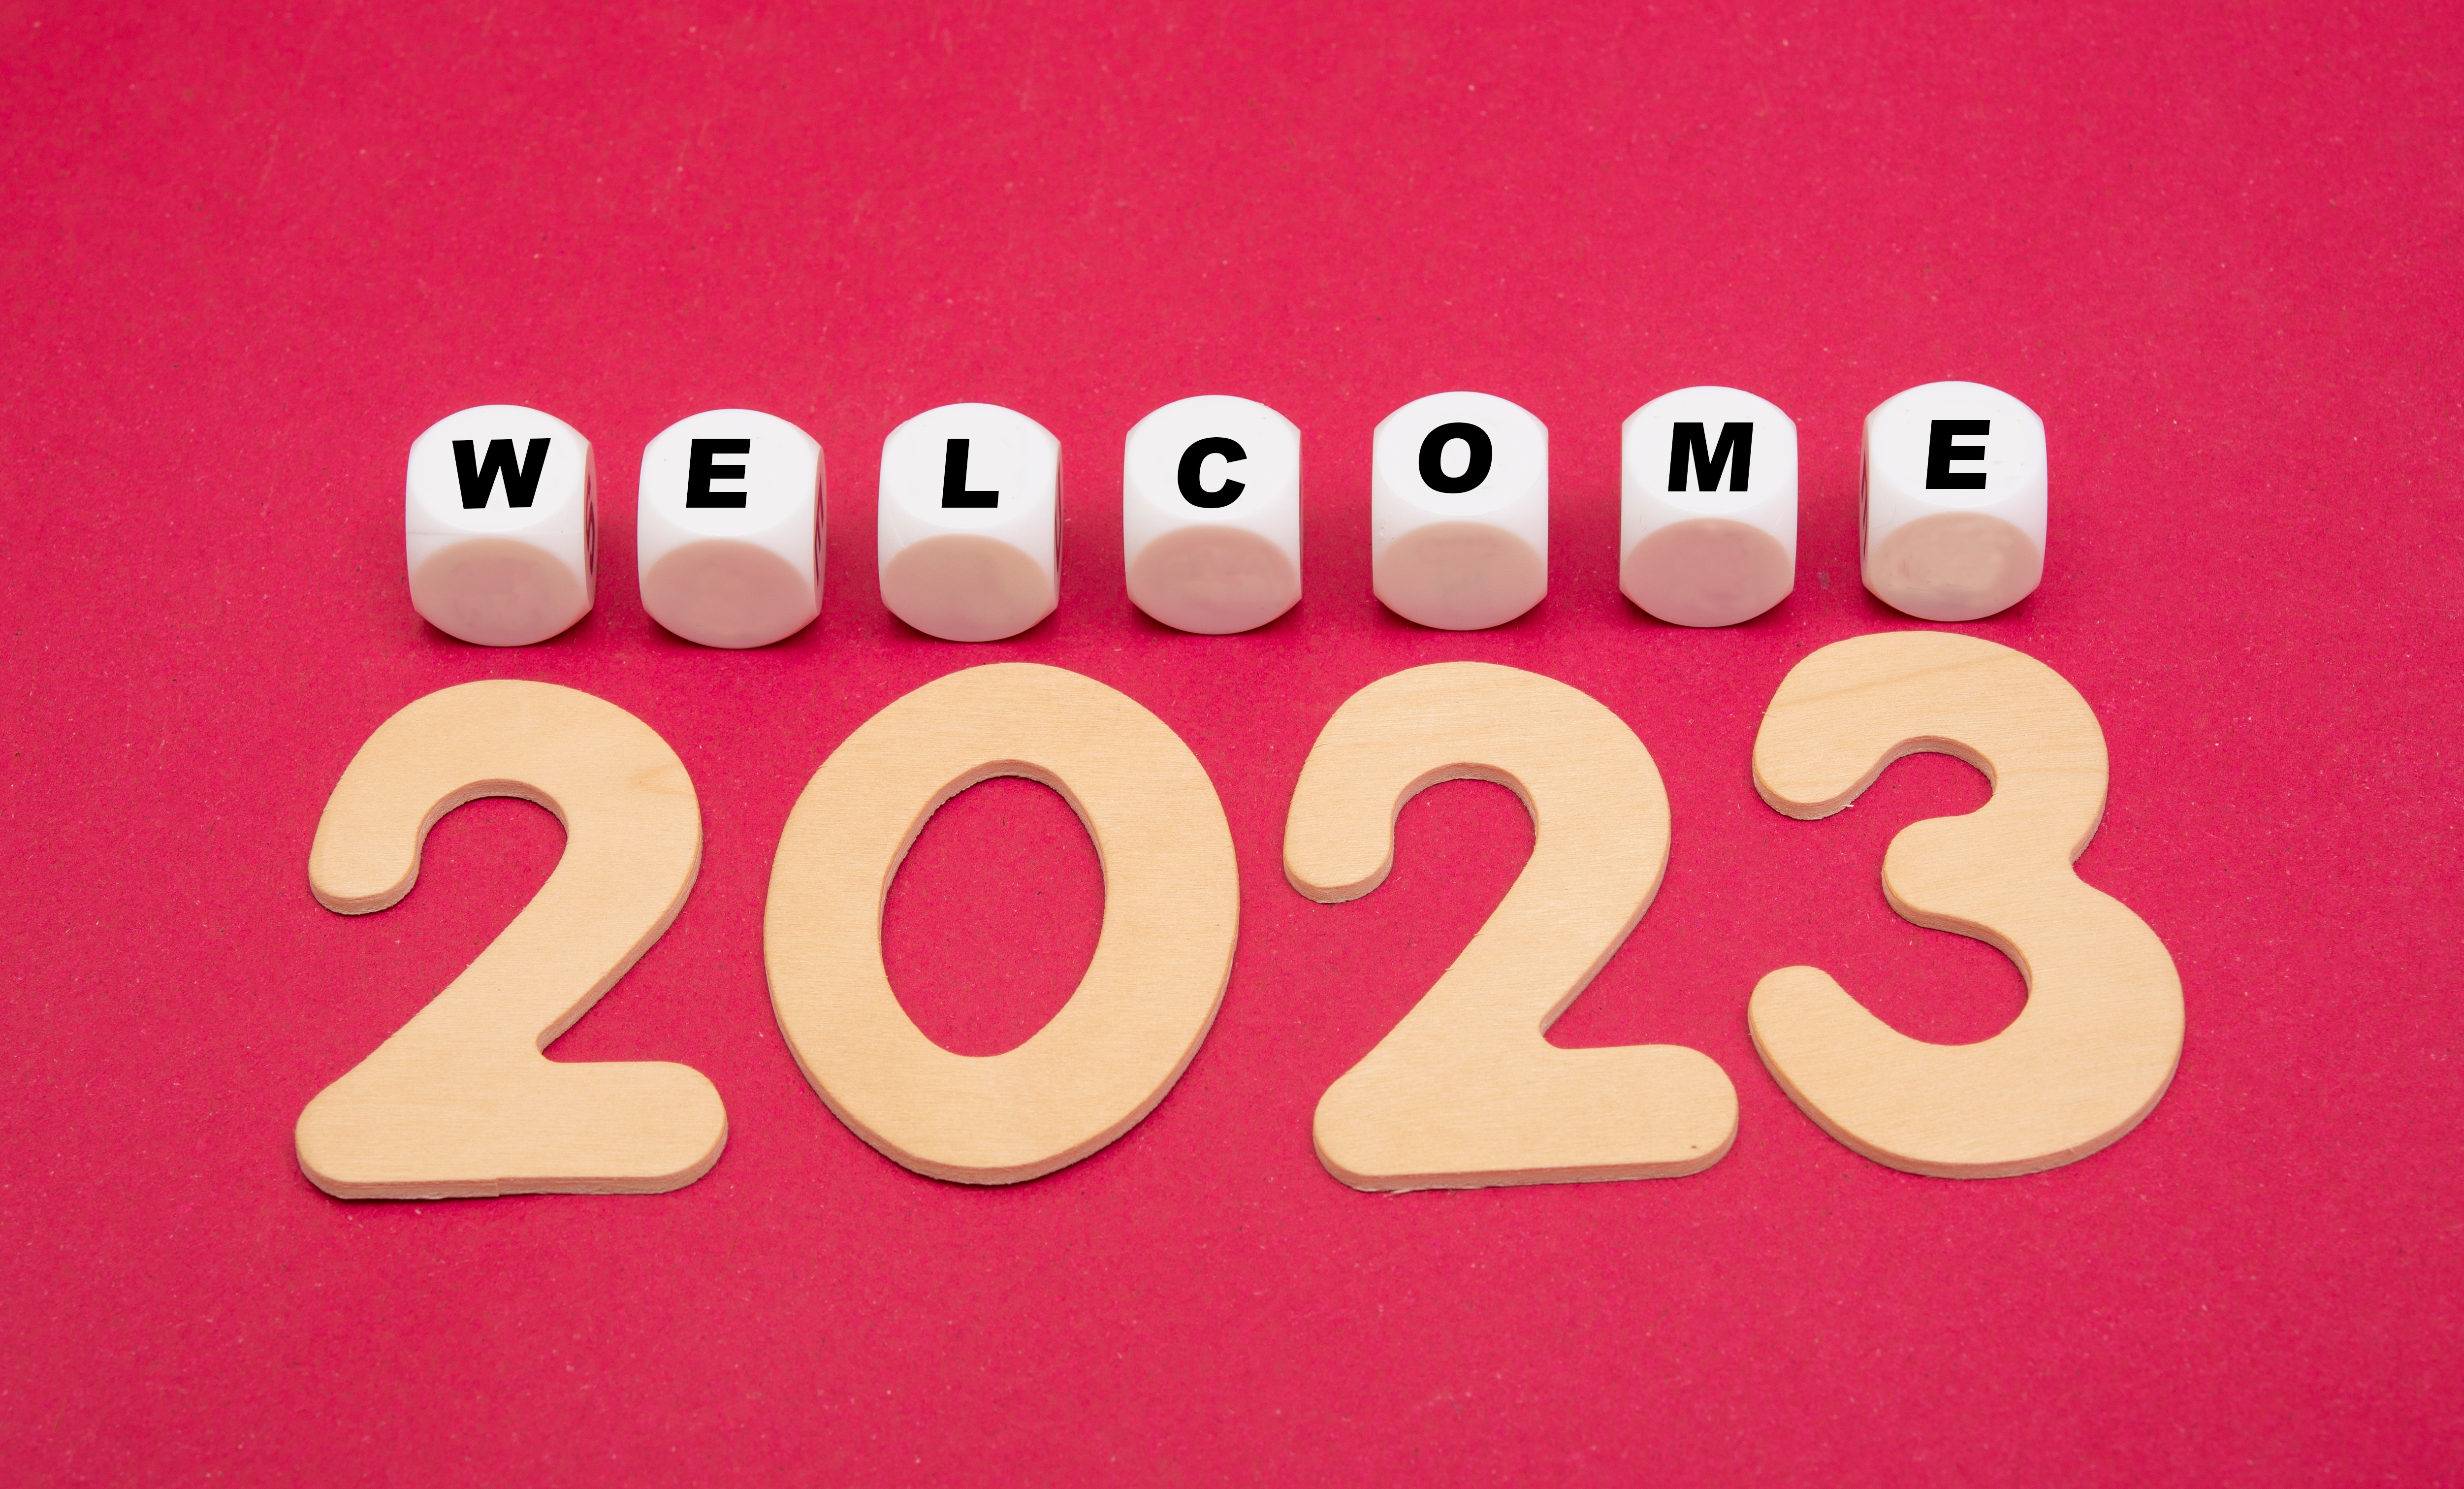 Welcome 2023 on red background